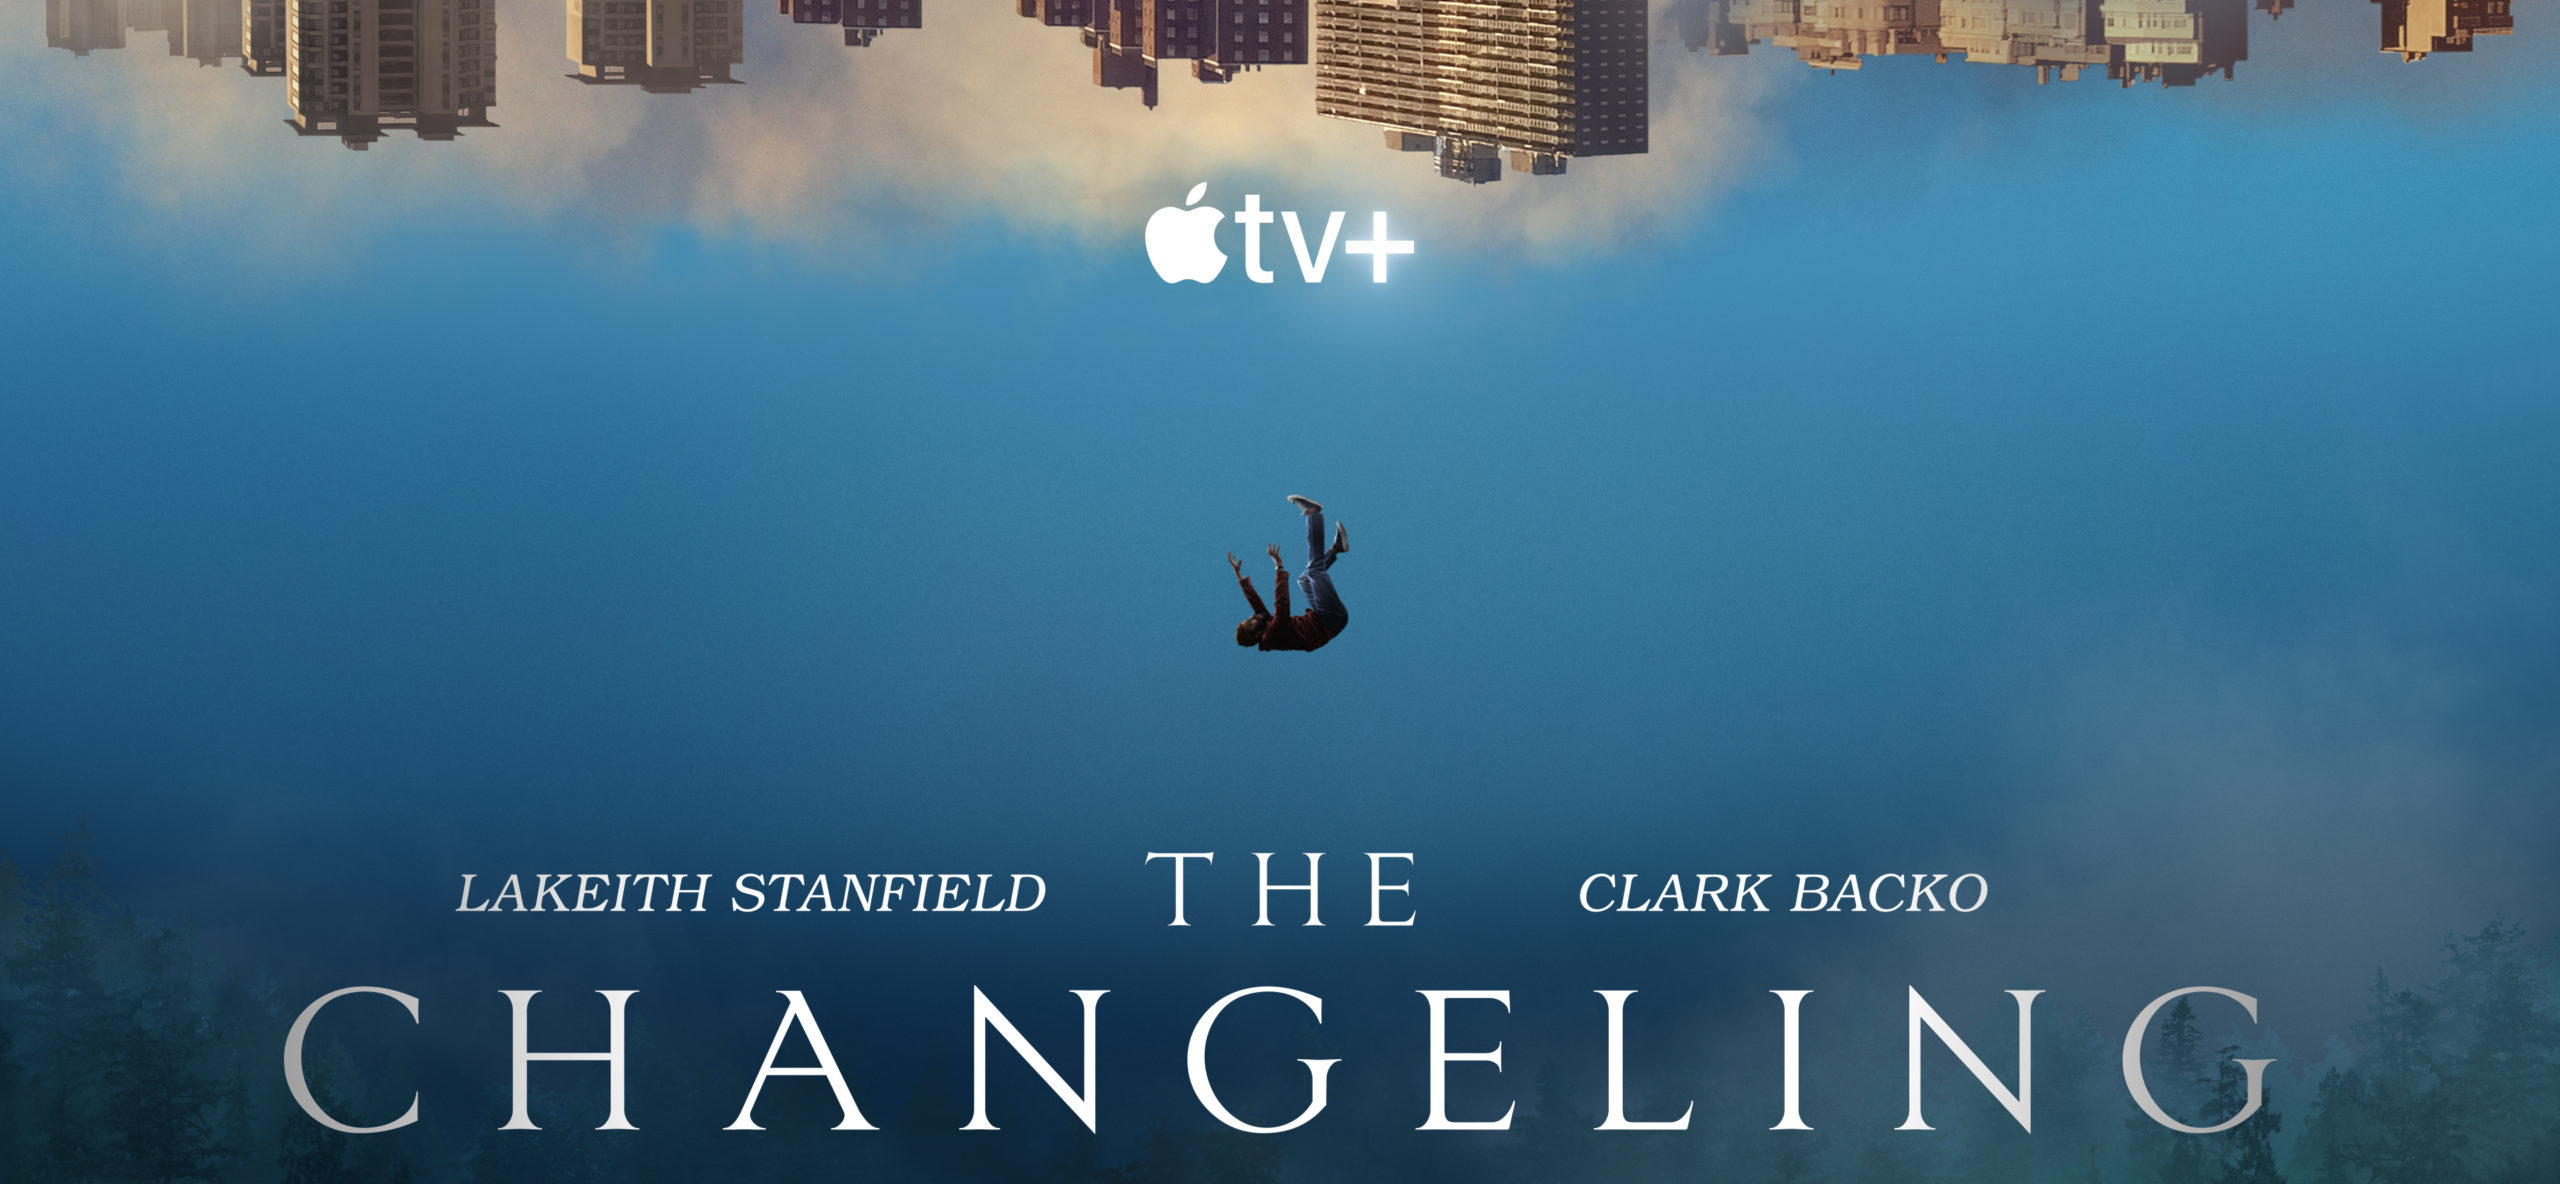 #The Changeling: Apple TV+ Releases First-Look Photos for Drama Series Starring LaKeith Stanfield